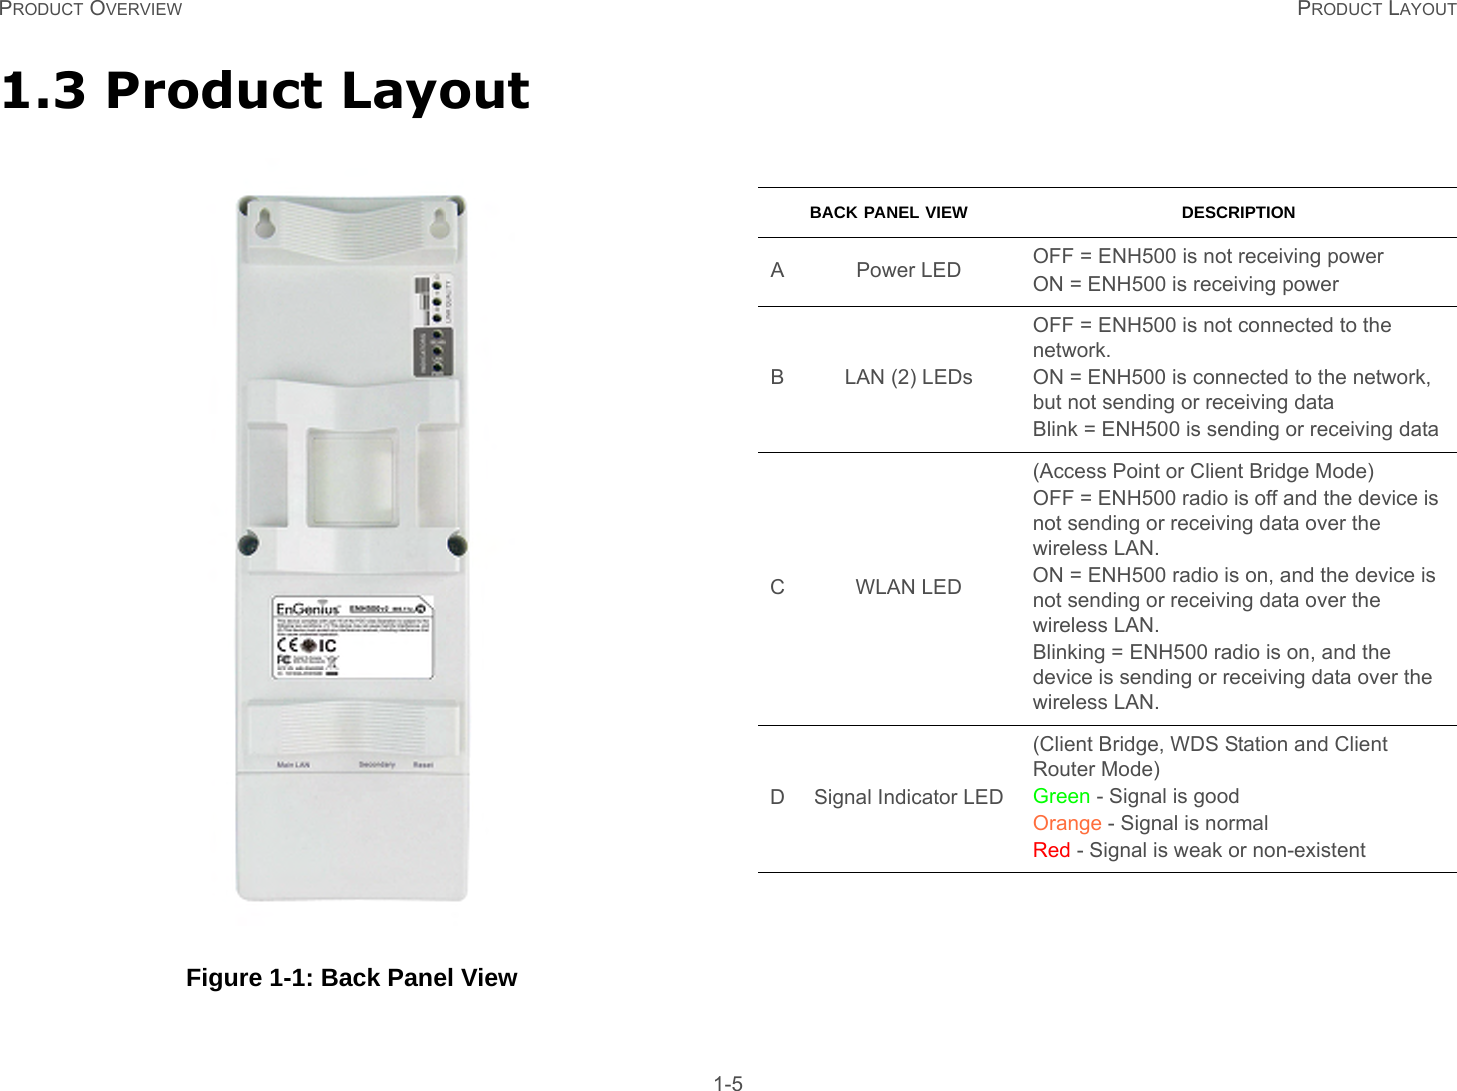 PRODUCT OVERVIEW PRODUCT LAYOUT 1-51.3 Product Layout Figure 1-1: Back Panel ViewBACK PANEL VIEW DESCRIPTIONA Power LED OFF = ENH500 is not receiving powerON = ENH500 is receiving powerB LAN (2) LEDsOFF = ENH500 is not connected to the network.ON = ENH500 is connected to the network, but not sending or receiving dataBlink = ENH500 is sending or receiving dataCWLAN LED(Access Point or Client Bridge Mode)OFF = ENH500 radio is off and the device is not sending or receiving data over the wireless LAN.ON = ENH500 radio is on, and the device is not sending or receiving data over the wireless LAN.Blinking = ENH500 radio is on, and the device is sending or receiving data over the wireless LAN.D Signal Indicator LED(Client Bridge, WDS Station and Client Router Mode)Green - Signal is goodOrange - Signal is normalRed - Signal is weak or non-existent